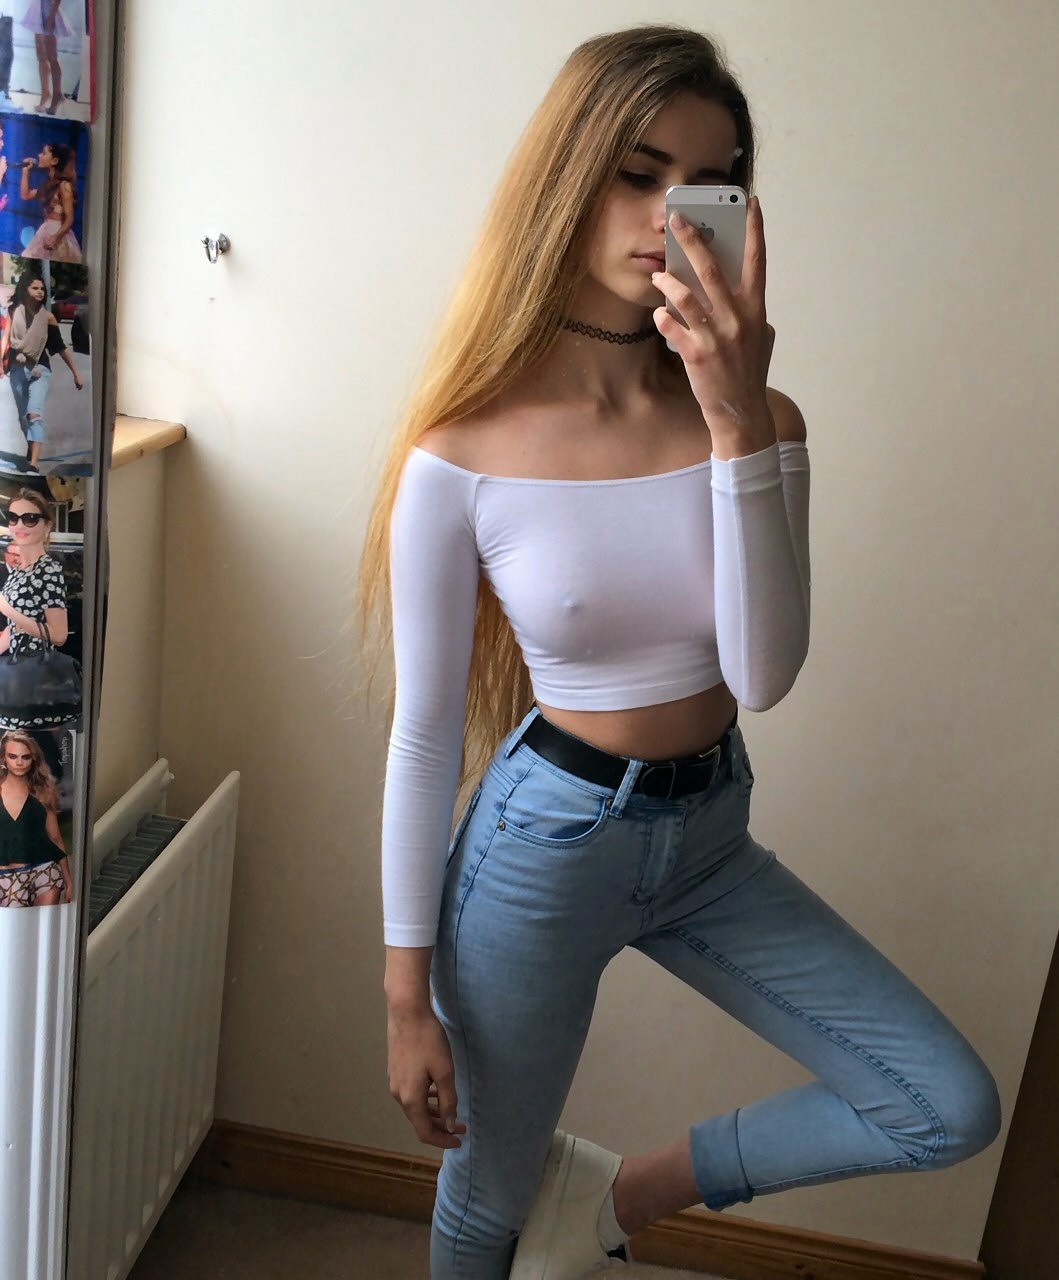 Tight top and jeans Porn Pic picture picture